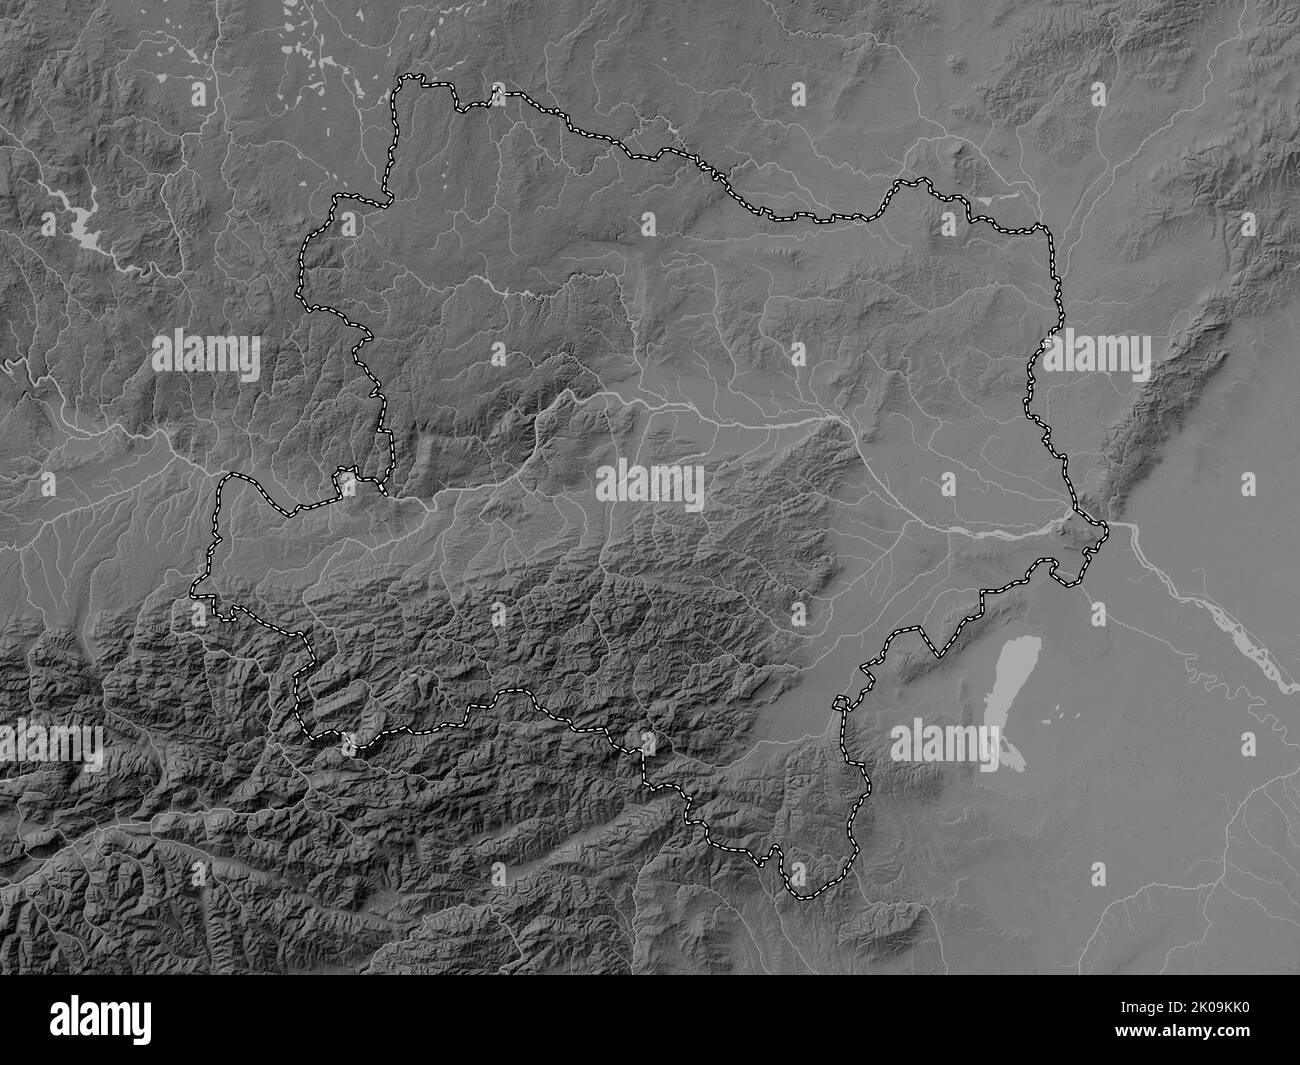 Niederosterreich, state of Austria. Grayscale elevation map with lakes and rivers Stock Photo